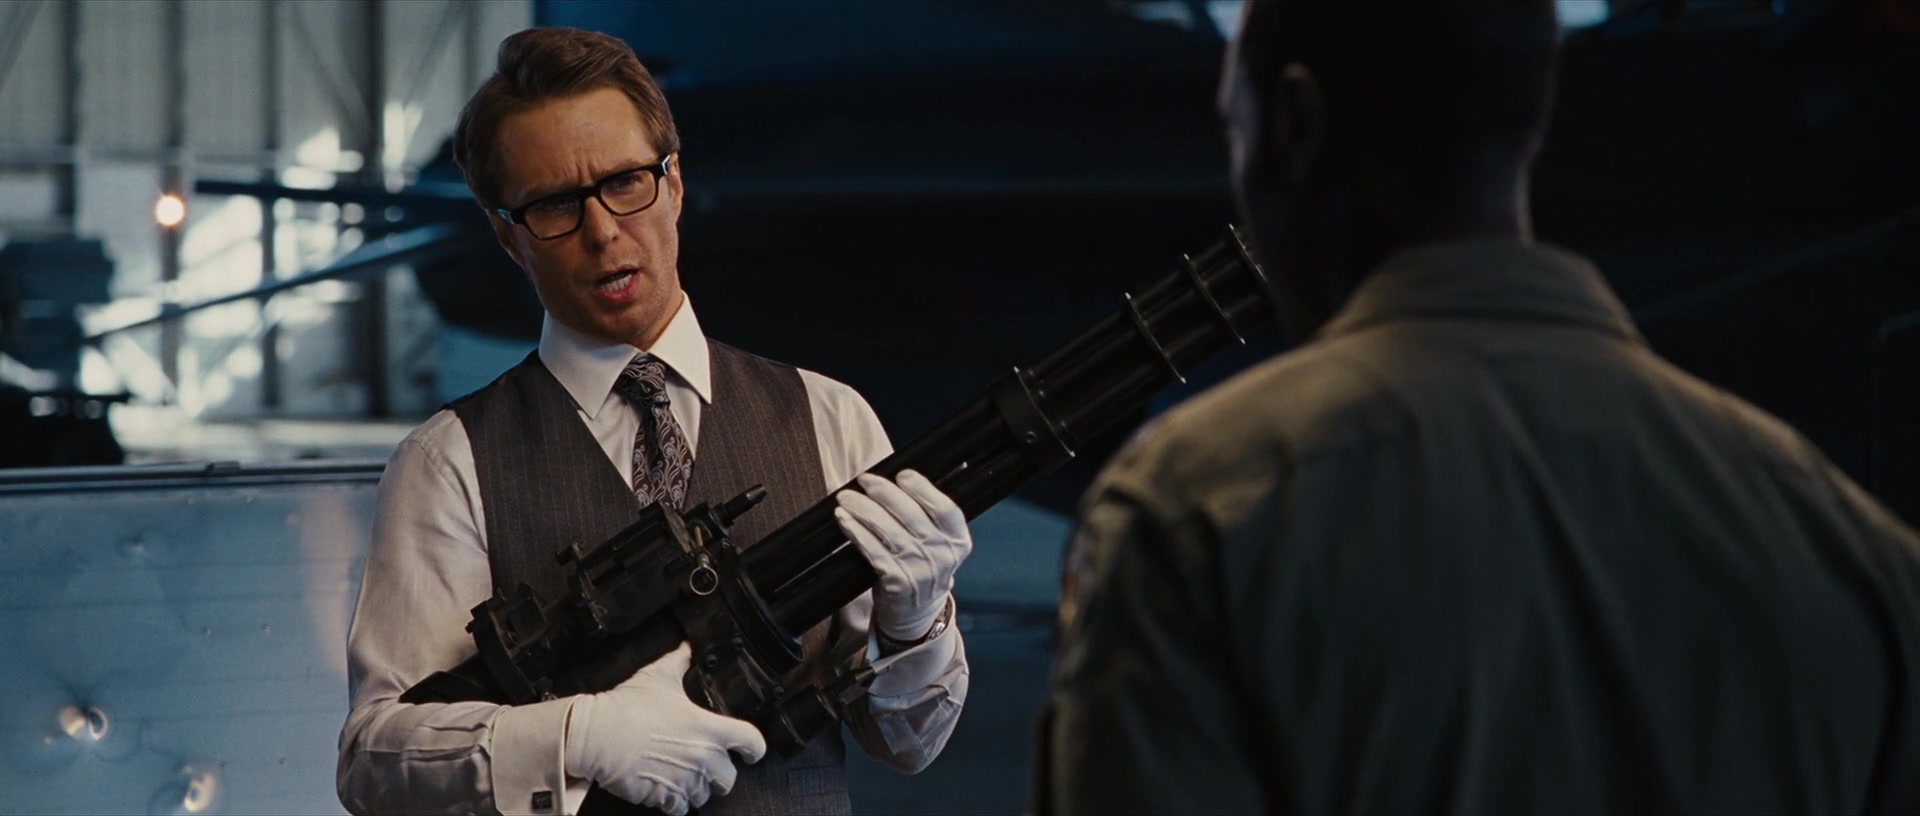 Justin Hammer (Sam Rockwell) offers War Machine (Don Cheadle) an FN F2000 Tactical for his armor in Iron Man 2 (2010), Marvel Entertainment via Blu-ray